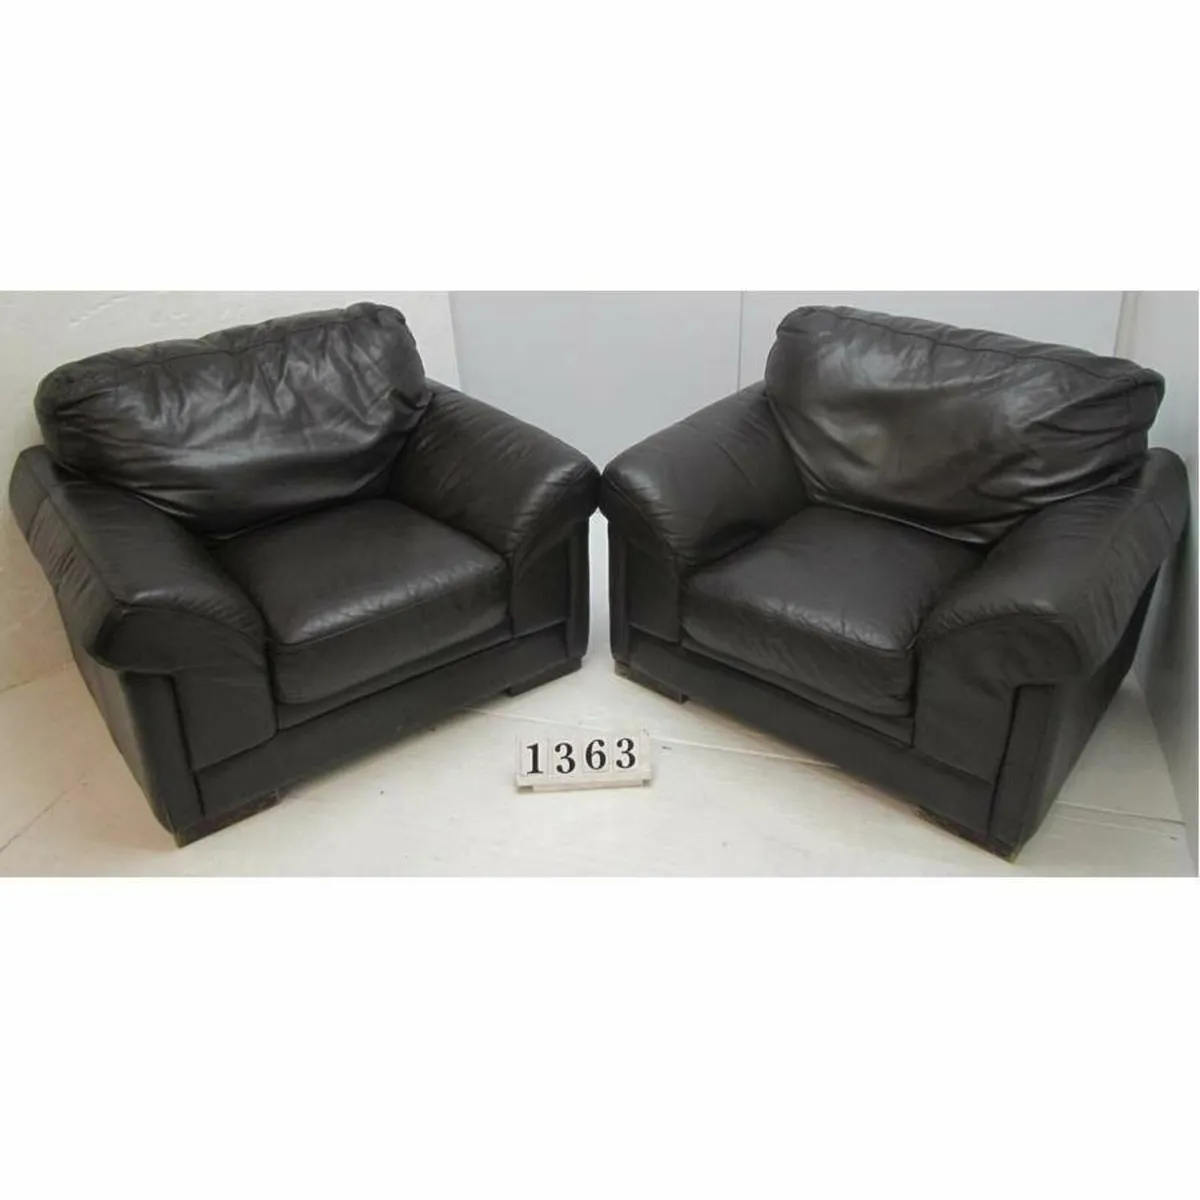 Pair of large leather armchairs.   #1363